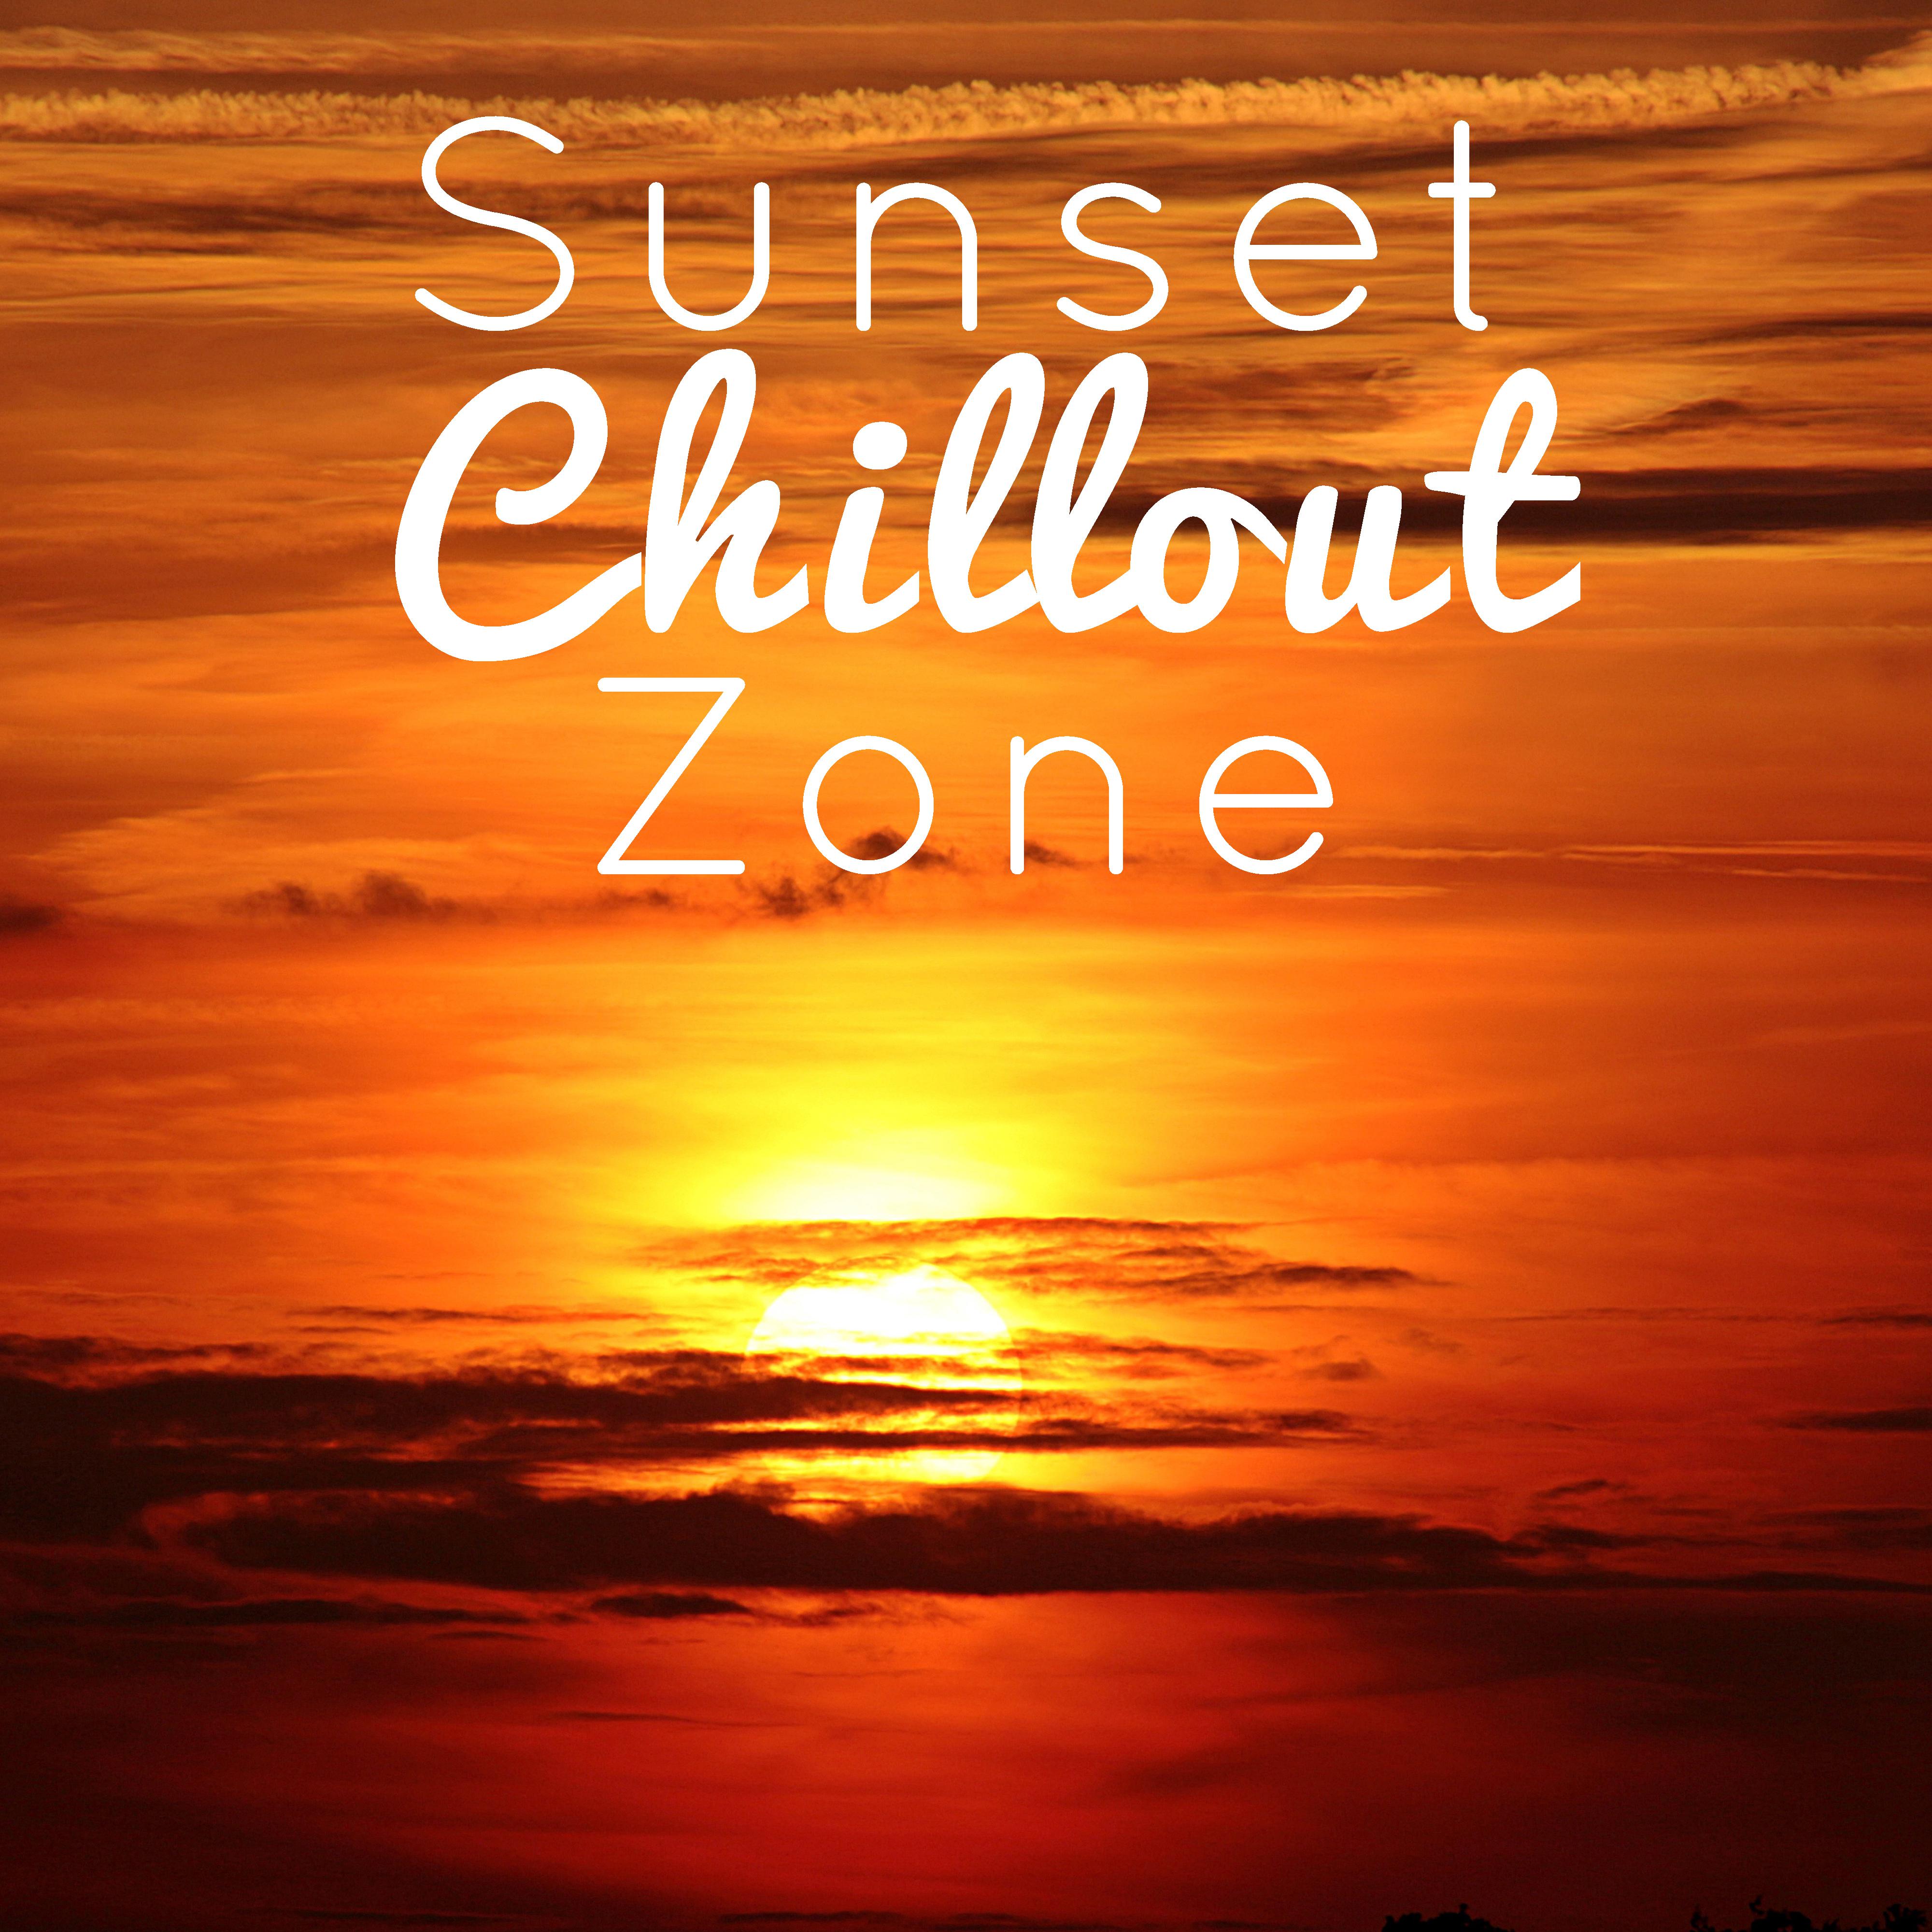 Sunset Chillout Zone  Chill Out Music, Relax Under The Palms, Hot Vibes, Summer Music